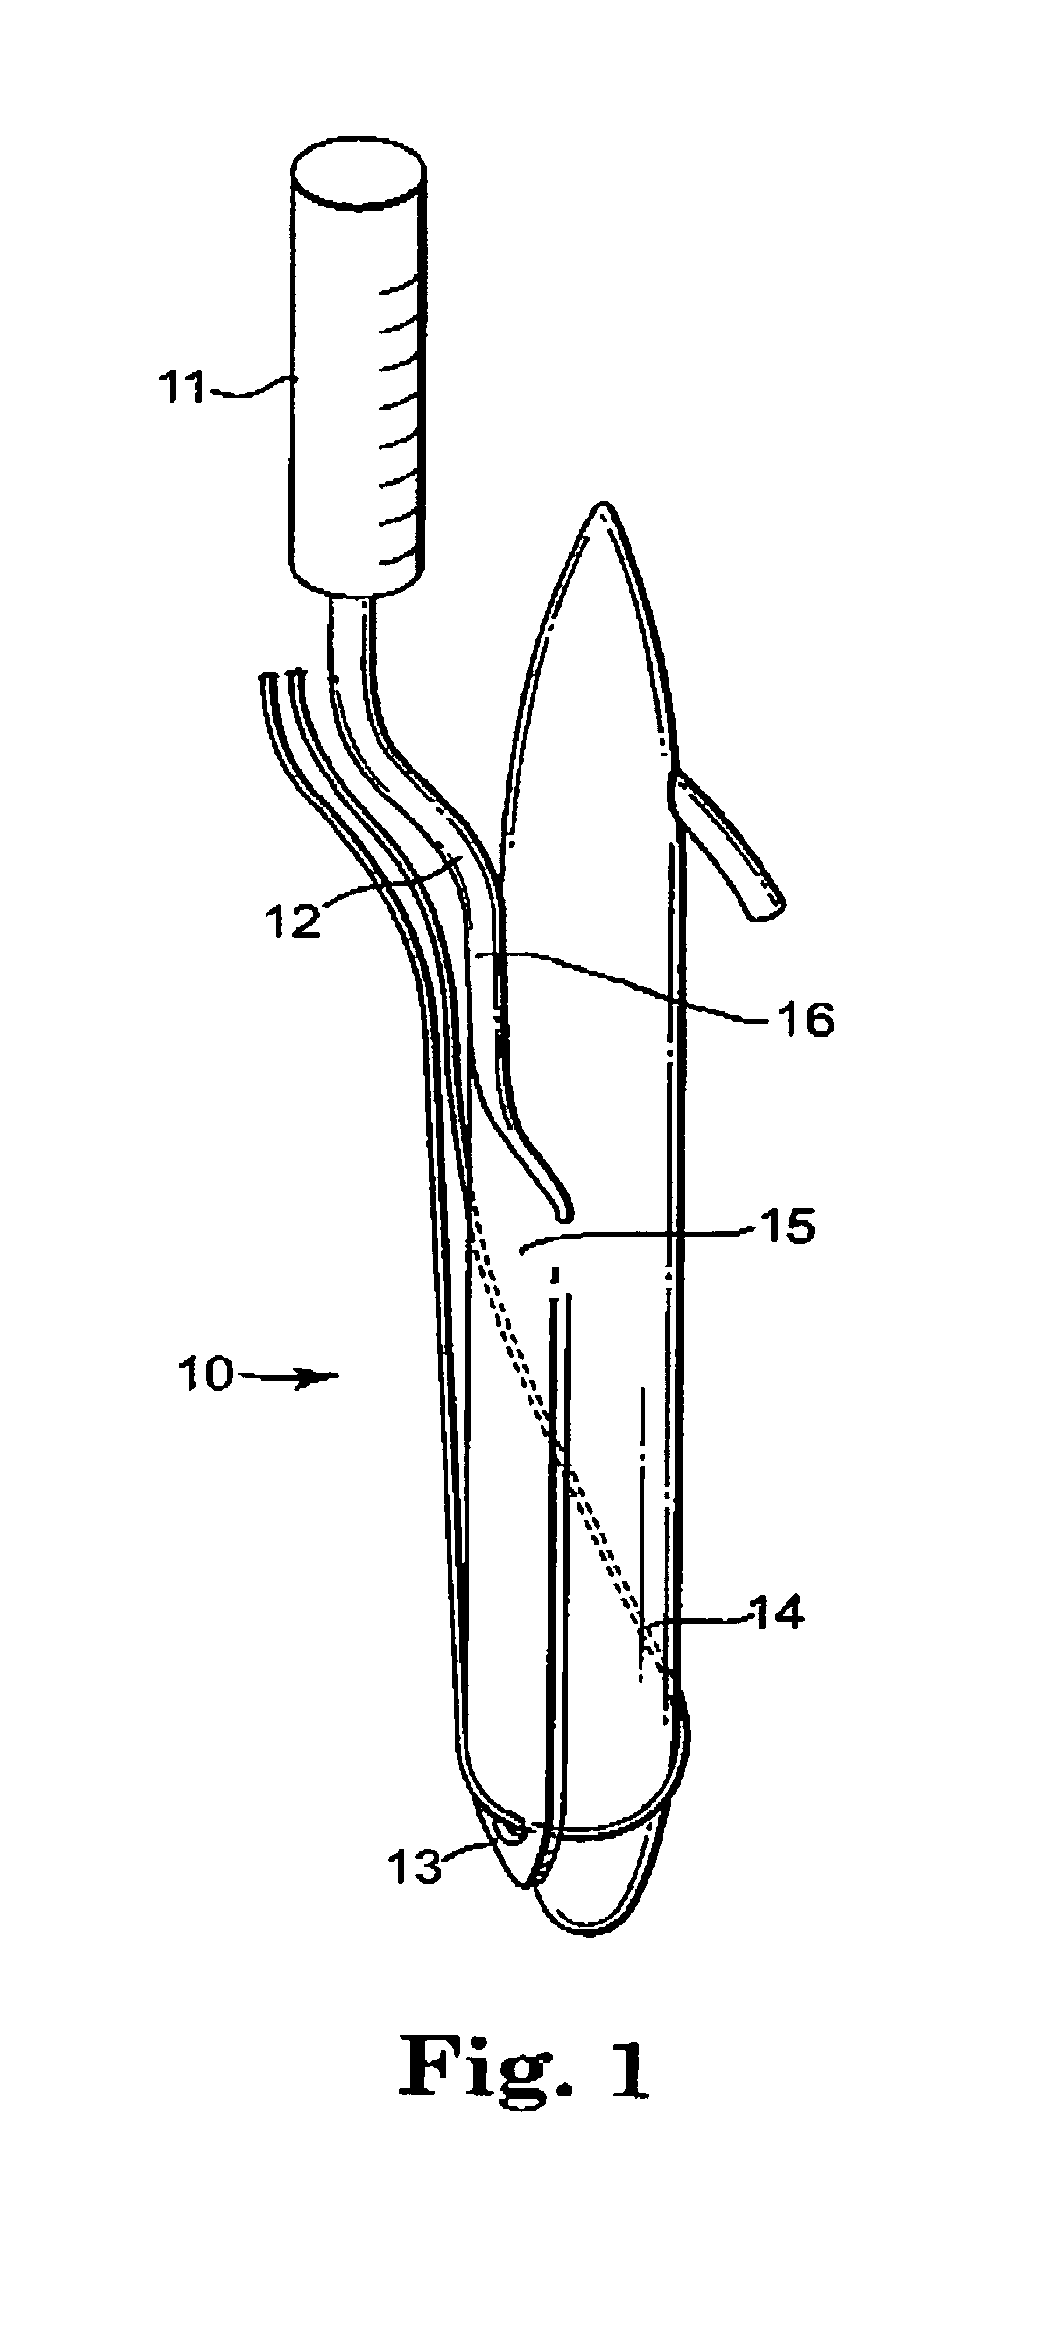 Penile prosthesis and surgical instruments for implantation of penile prostheses